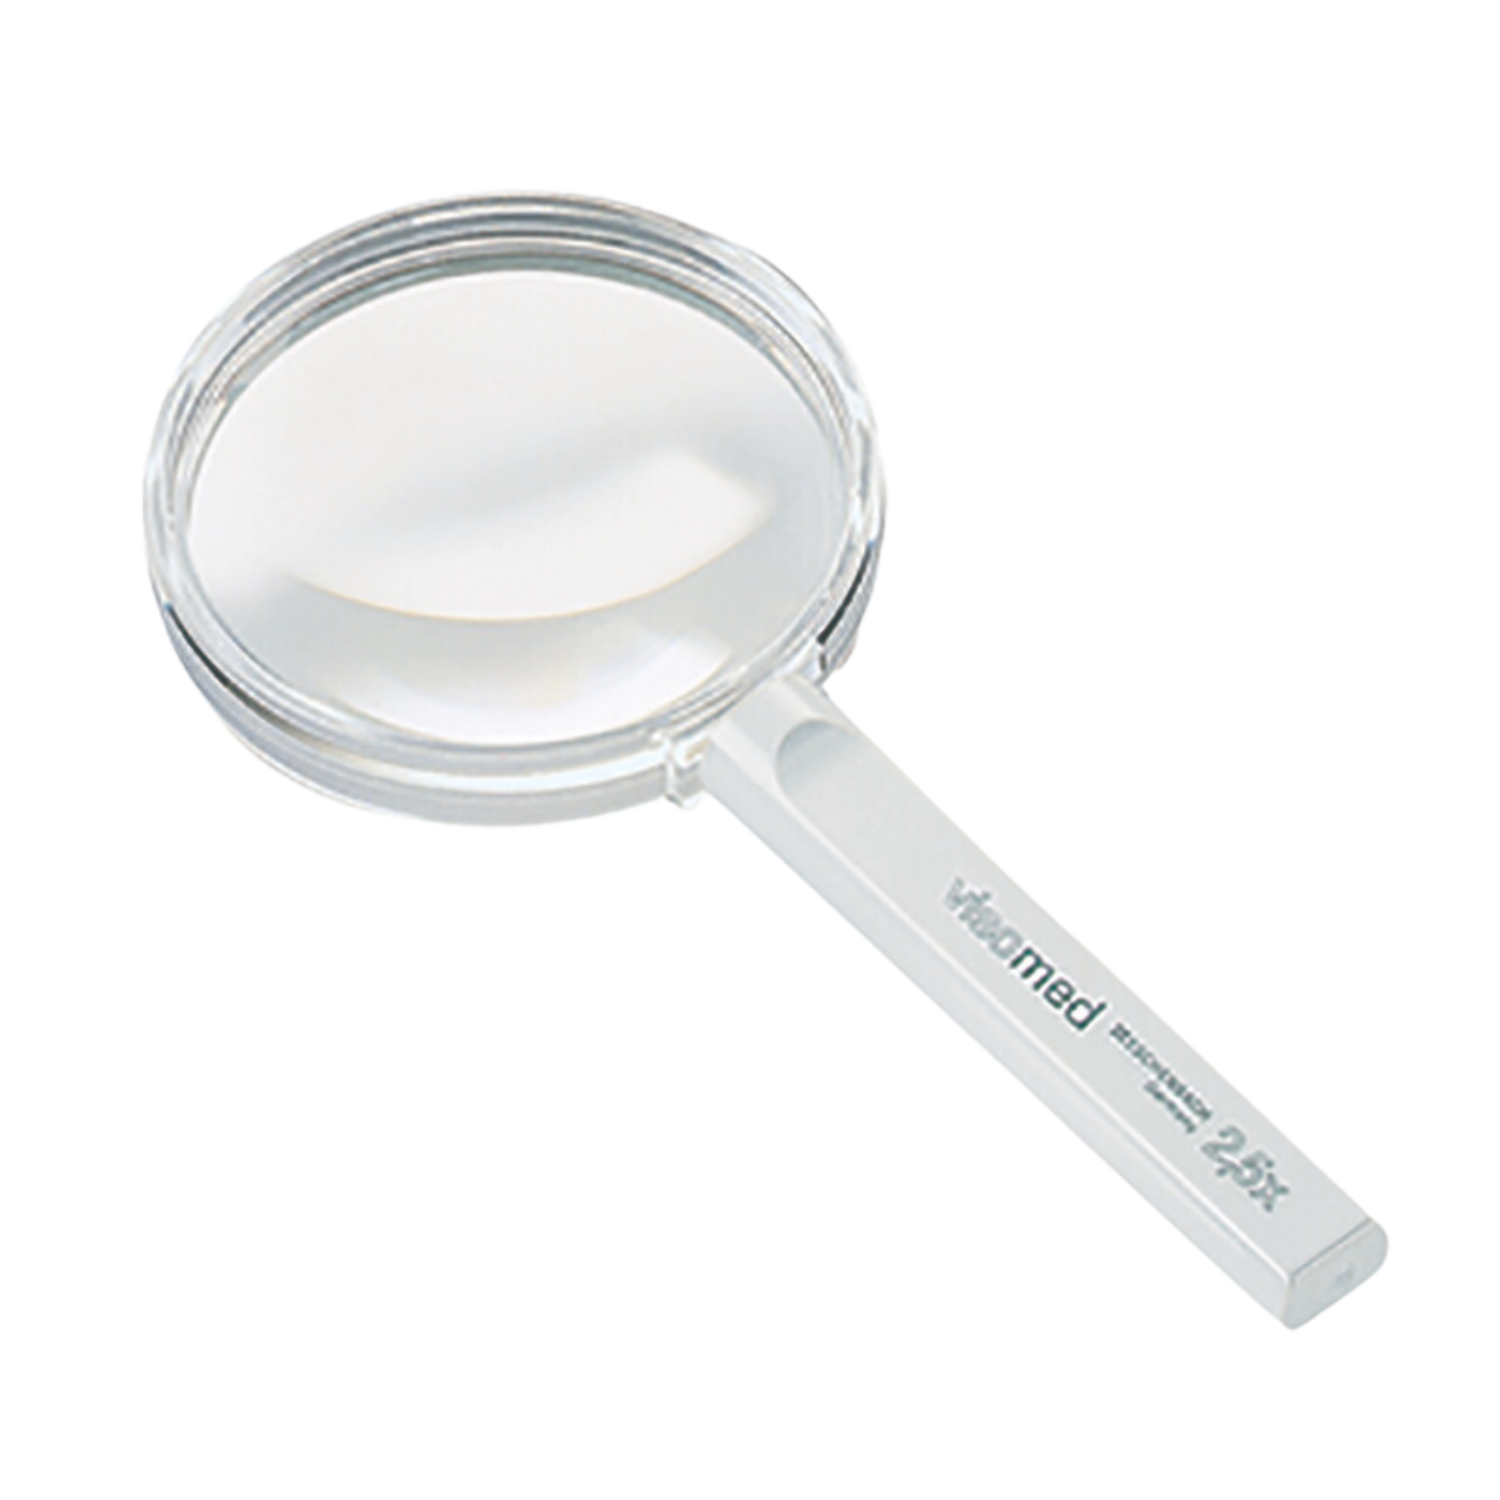 Image of the Visomed round magnifying glass from Eschenbach.